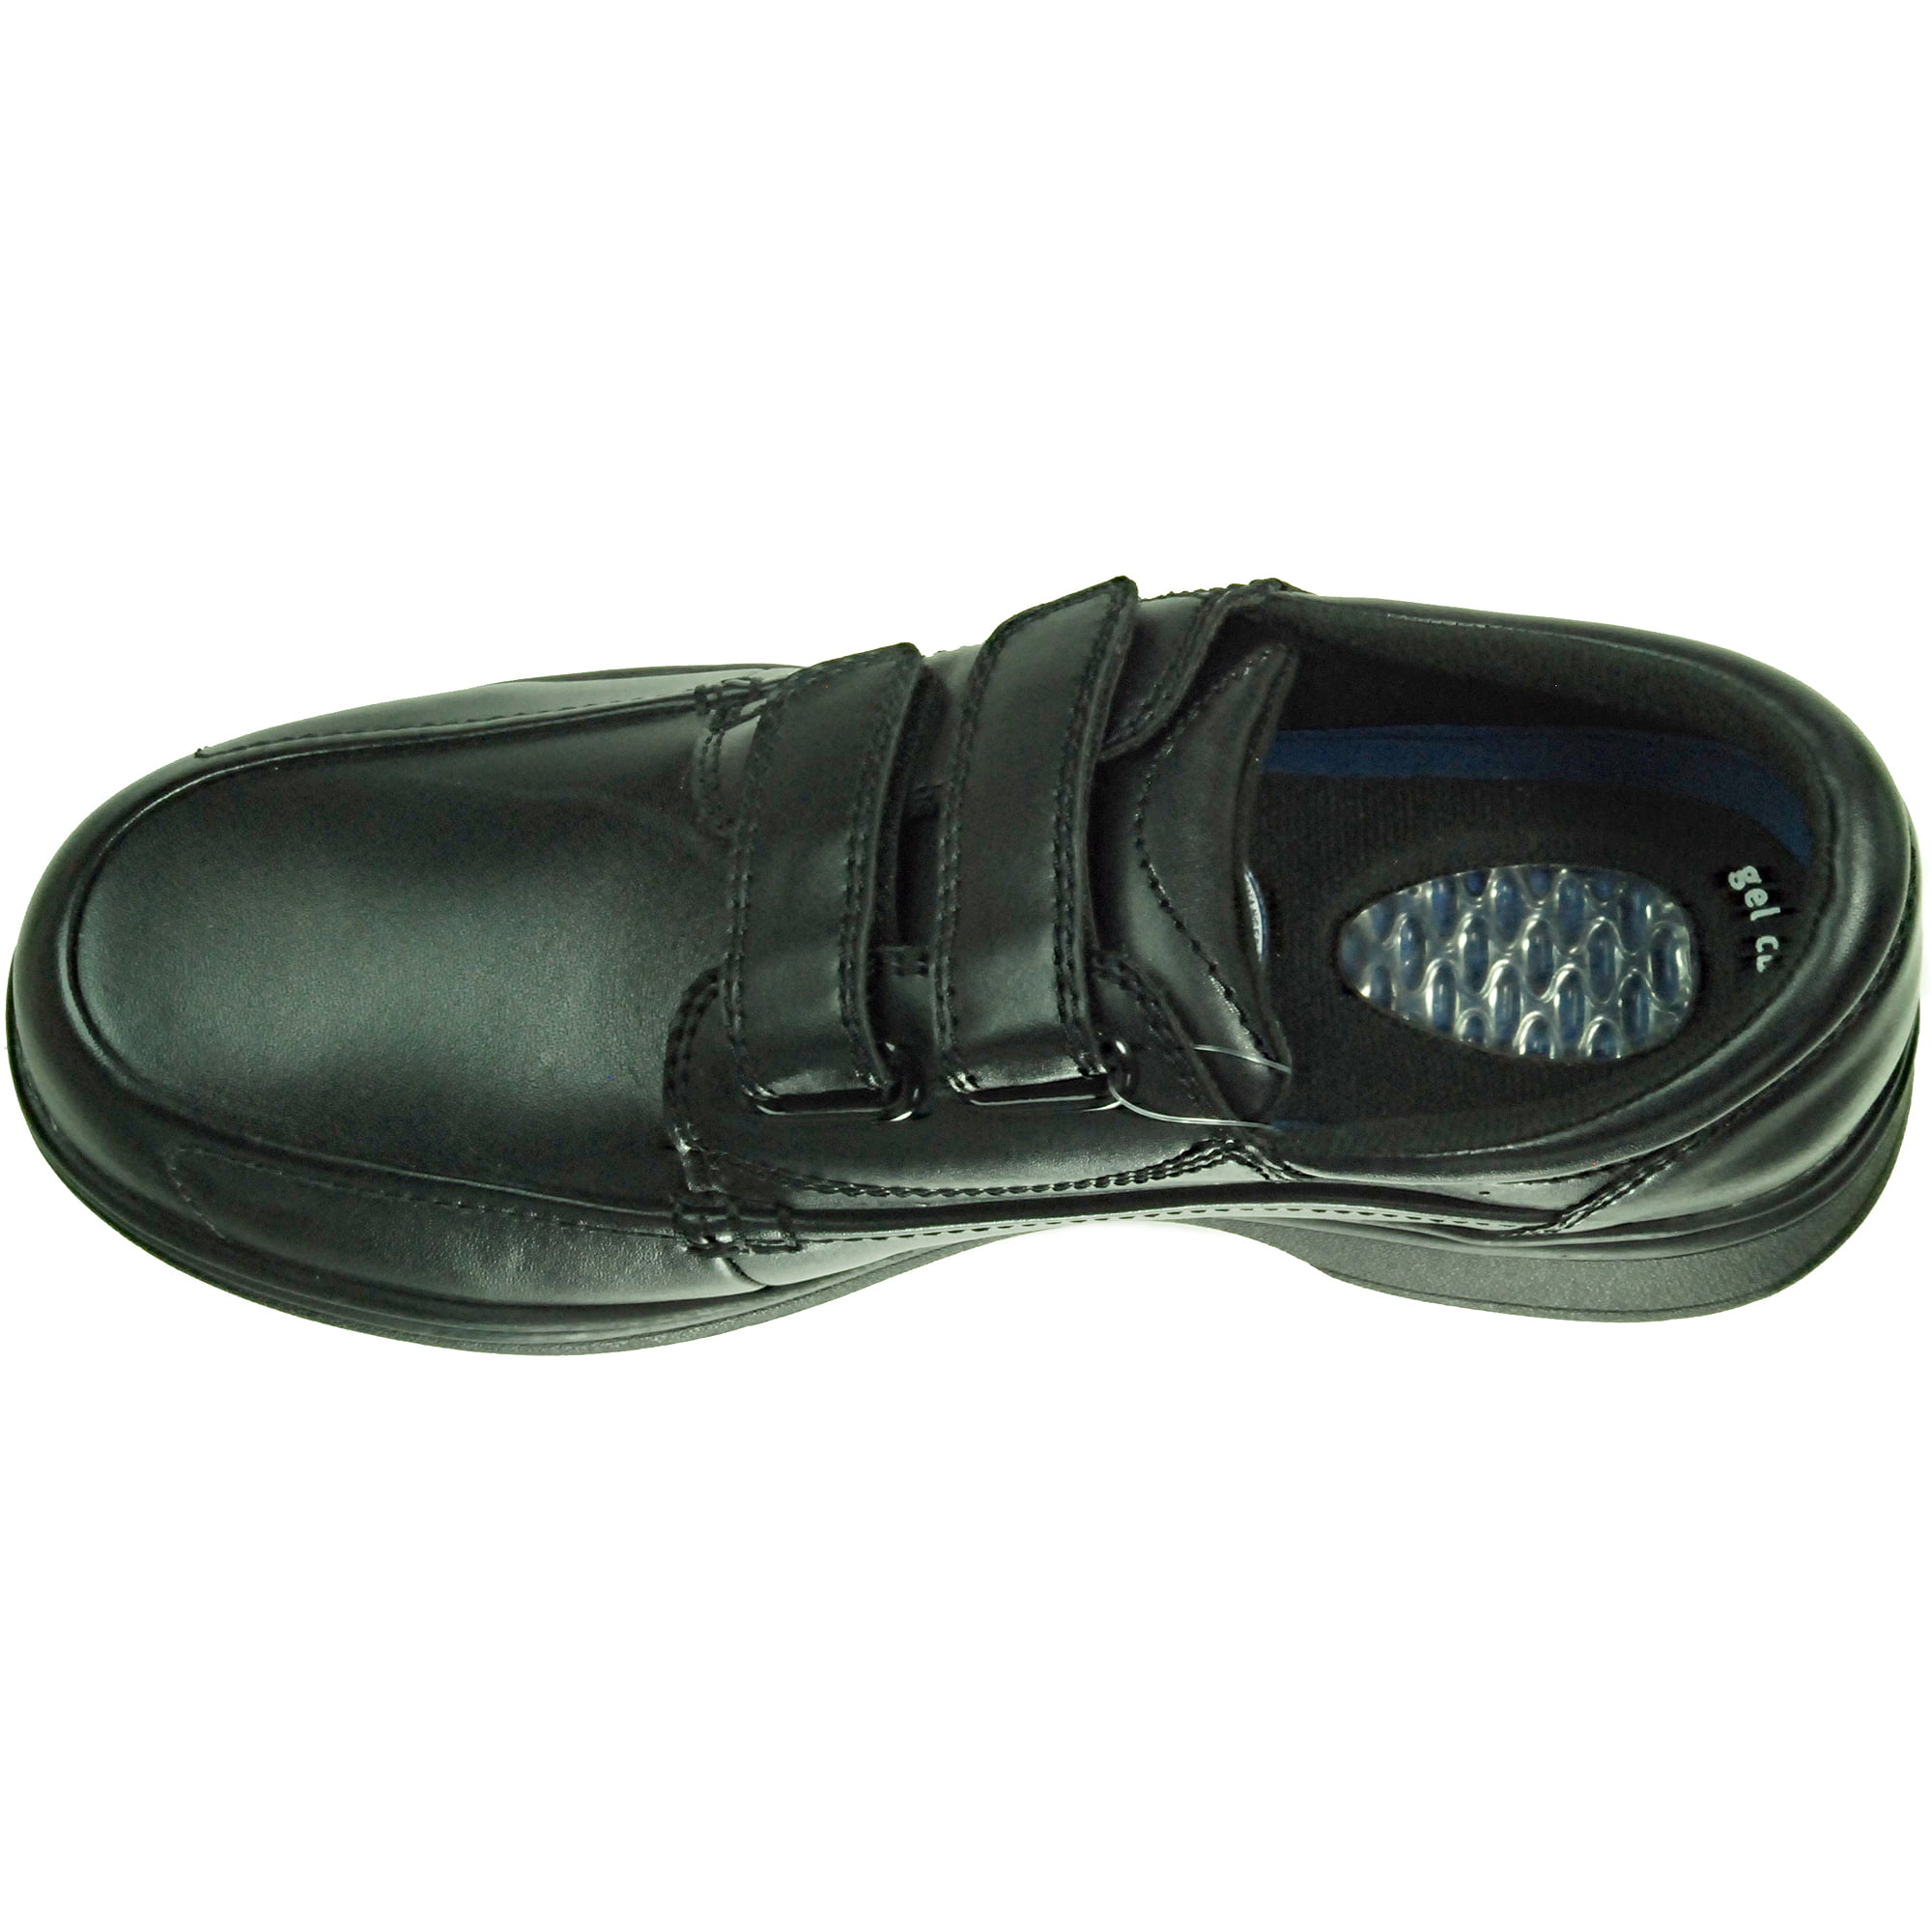 dr scholl's shoes with velcro straps